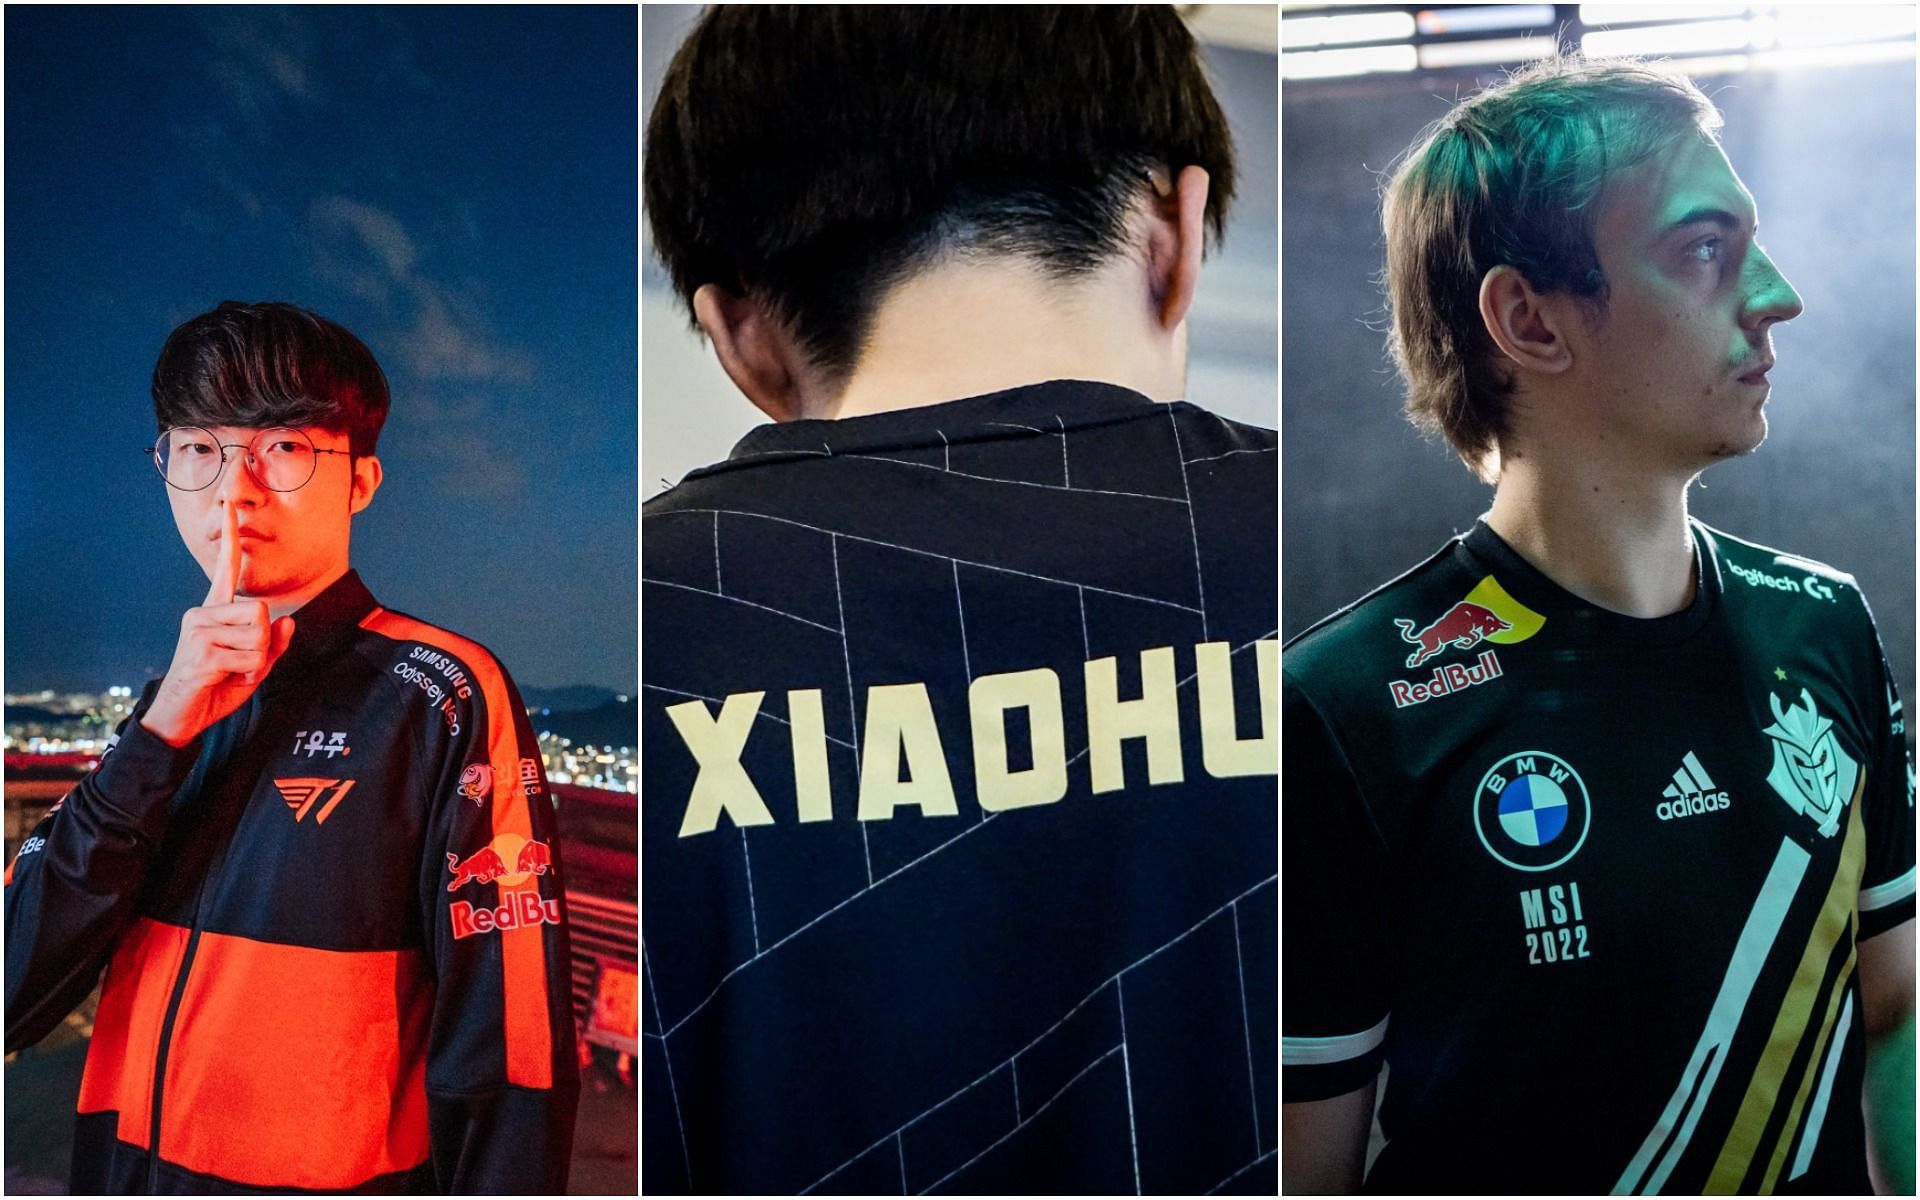 Faker, Caps, and Xiaohu have been in tremendous form at League of Legends MSI 2022 (Image via Riot Games)